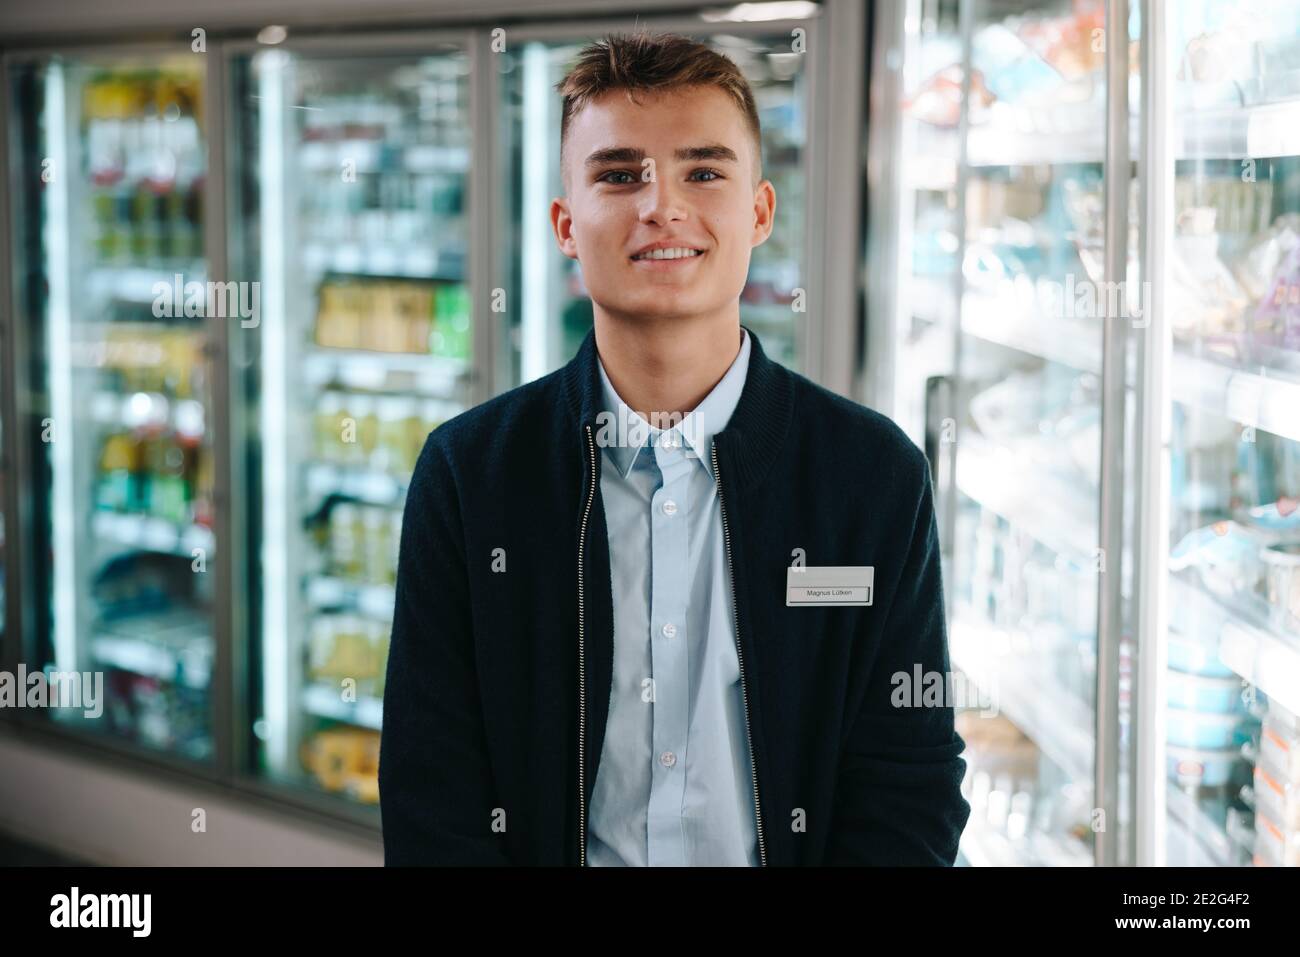 Supermarket trainee employee. Young male worker on holiday job at grocery shop. Stock Photo